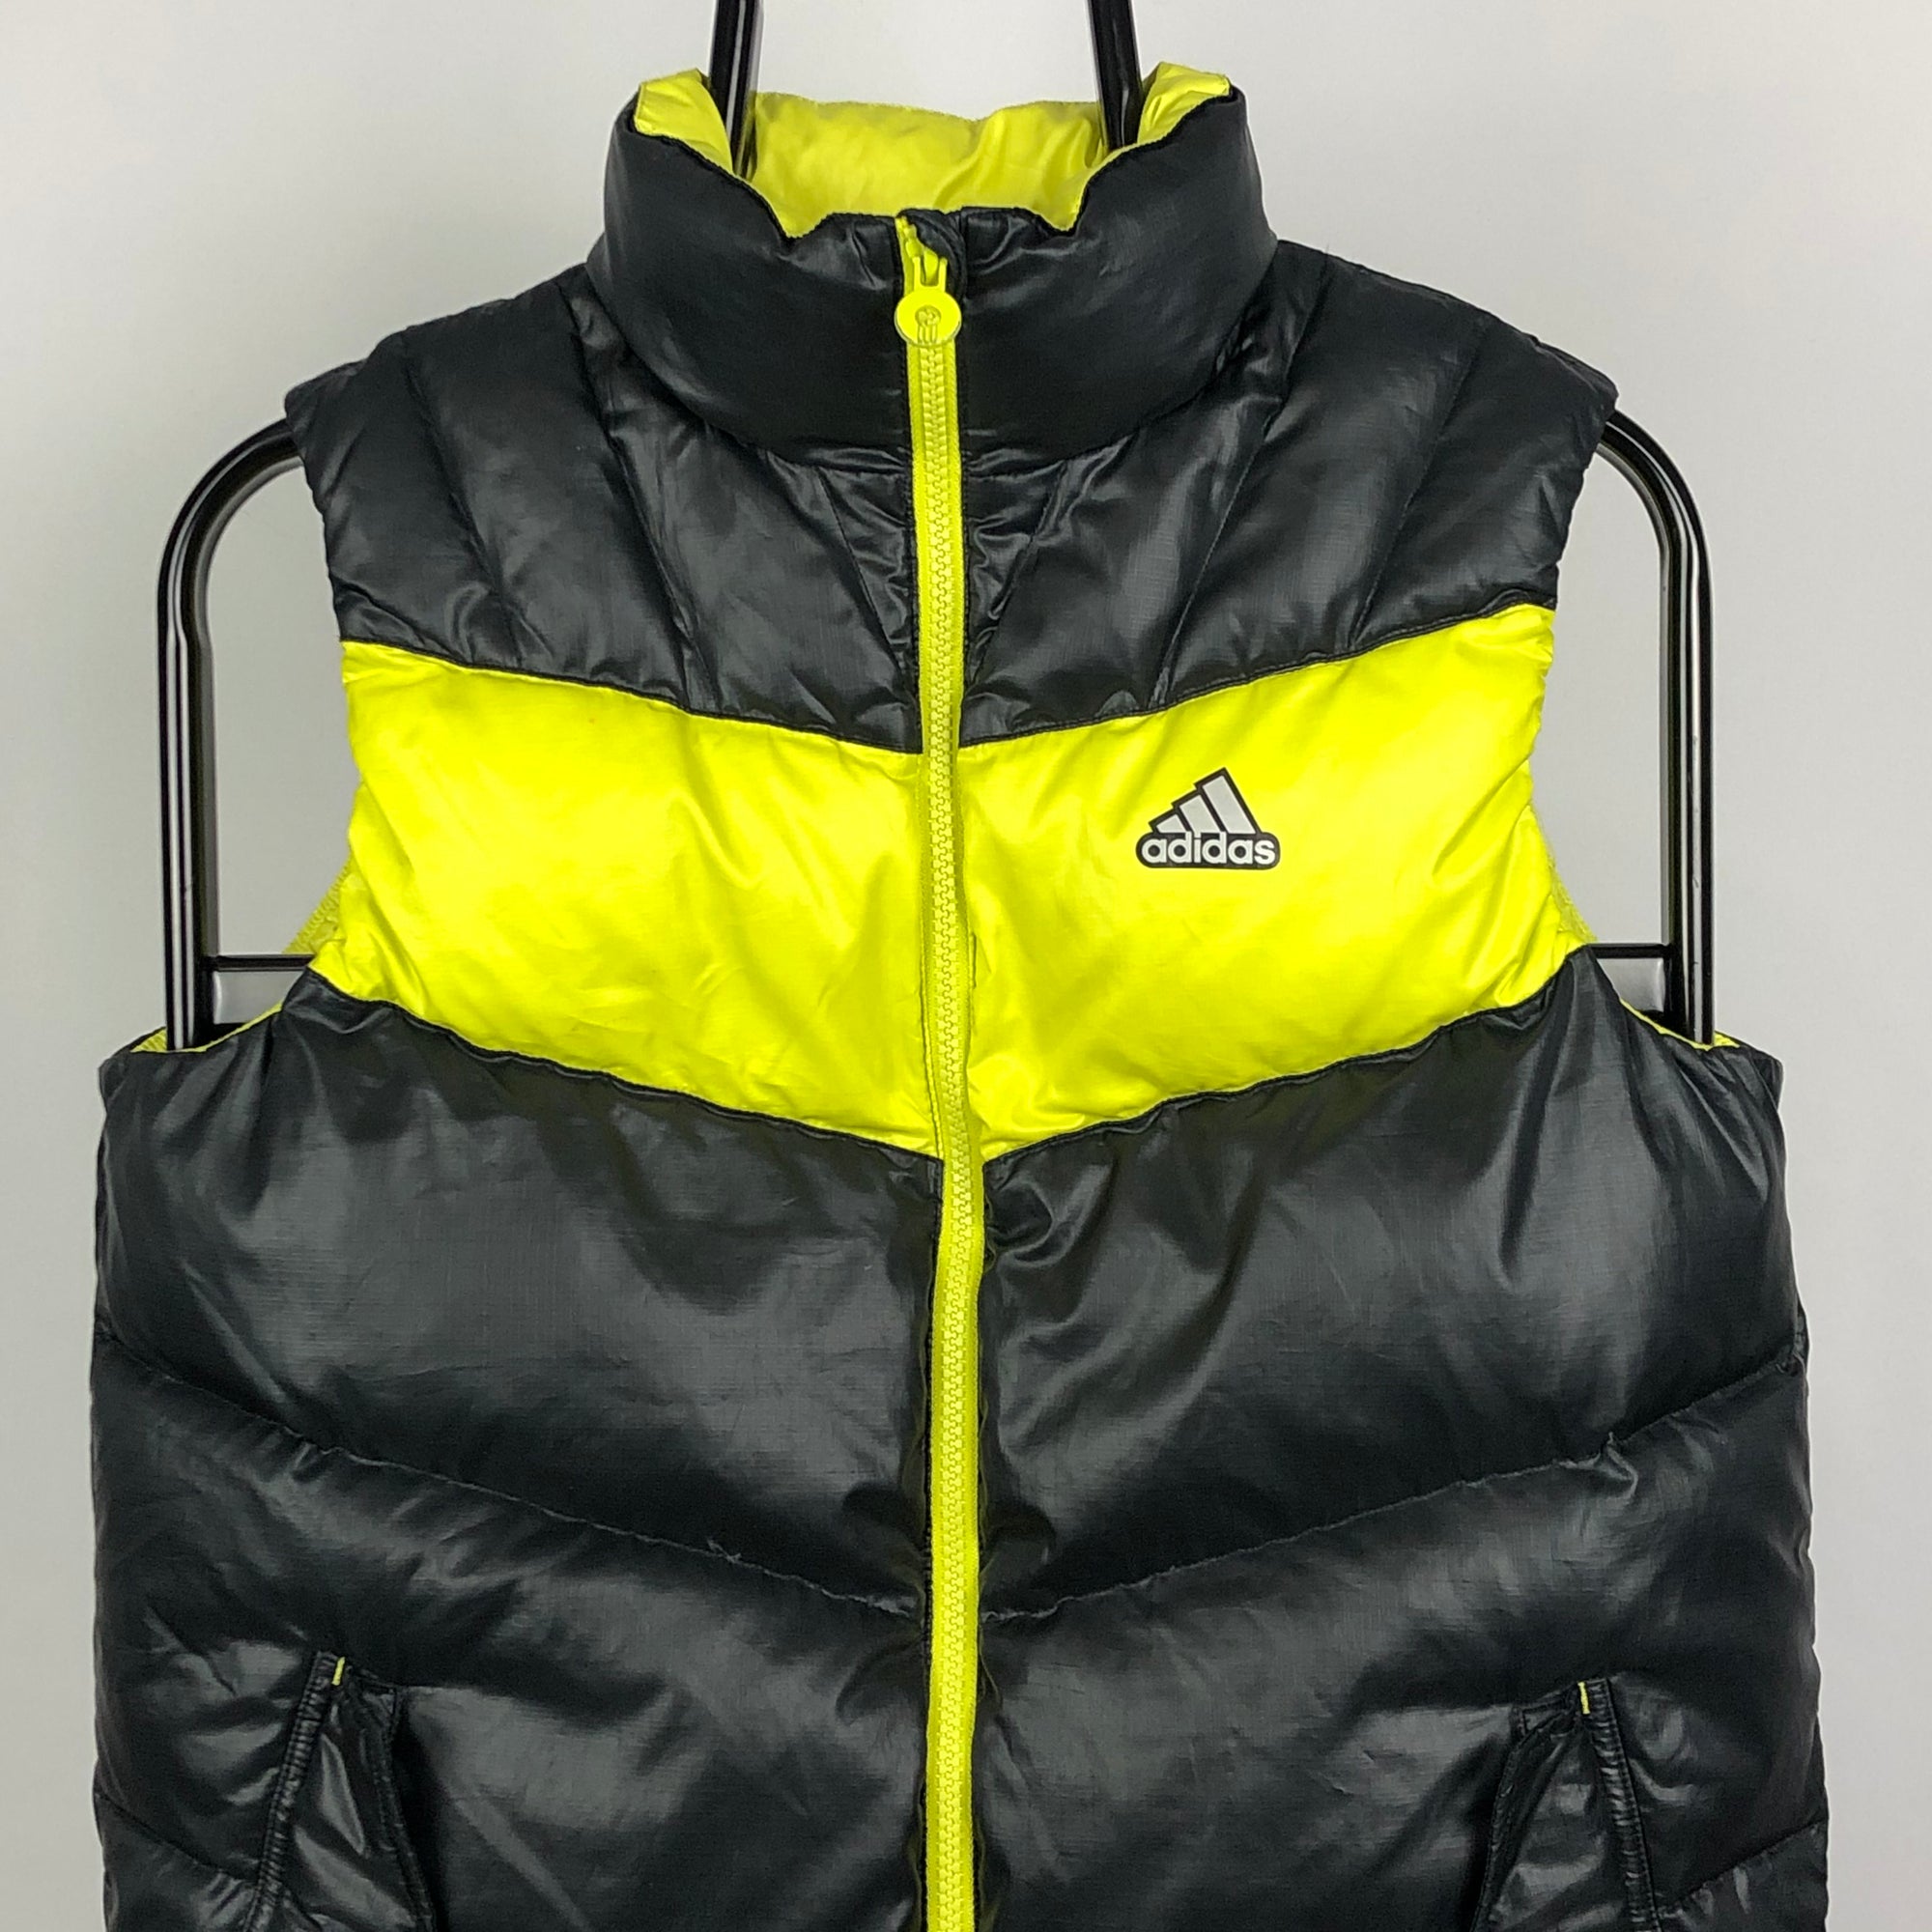 Vintage Adidas Sample Collection Gilet in Black/Volt Yellow - Men's XS/Women's Small